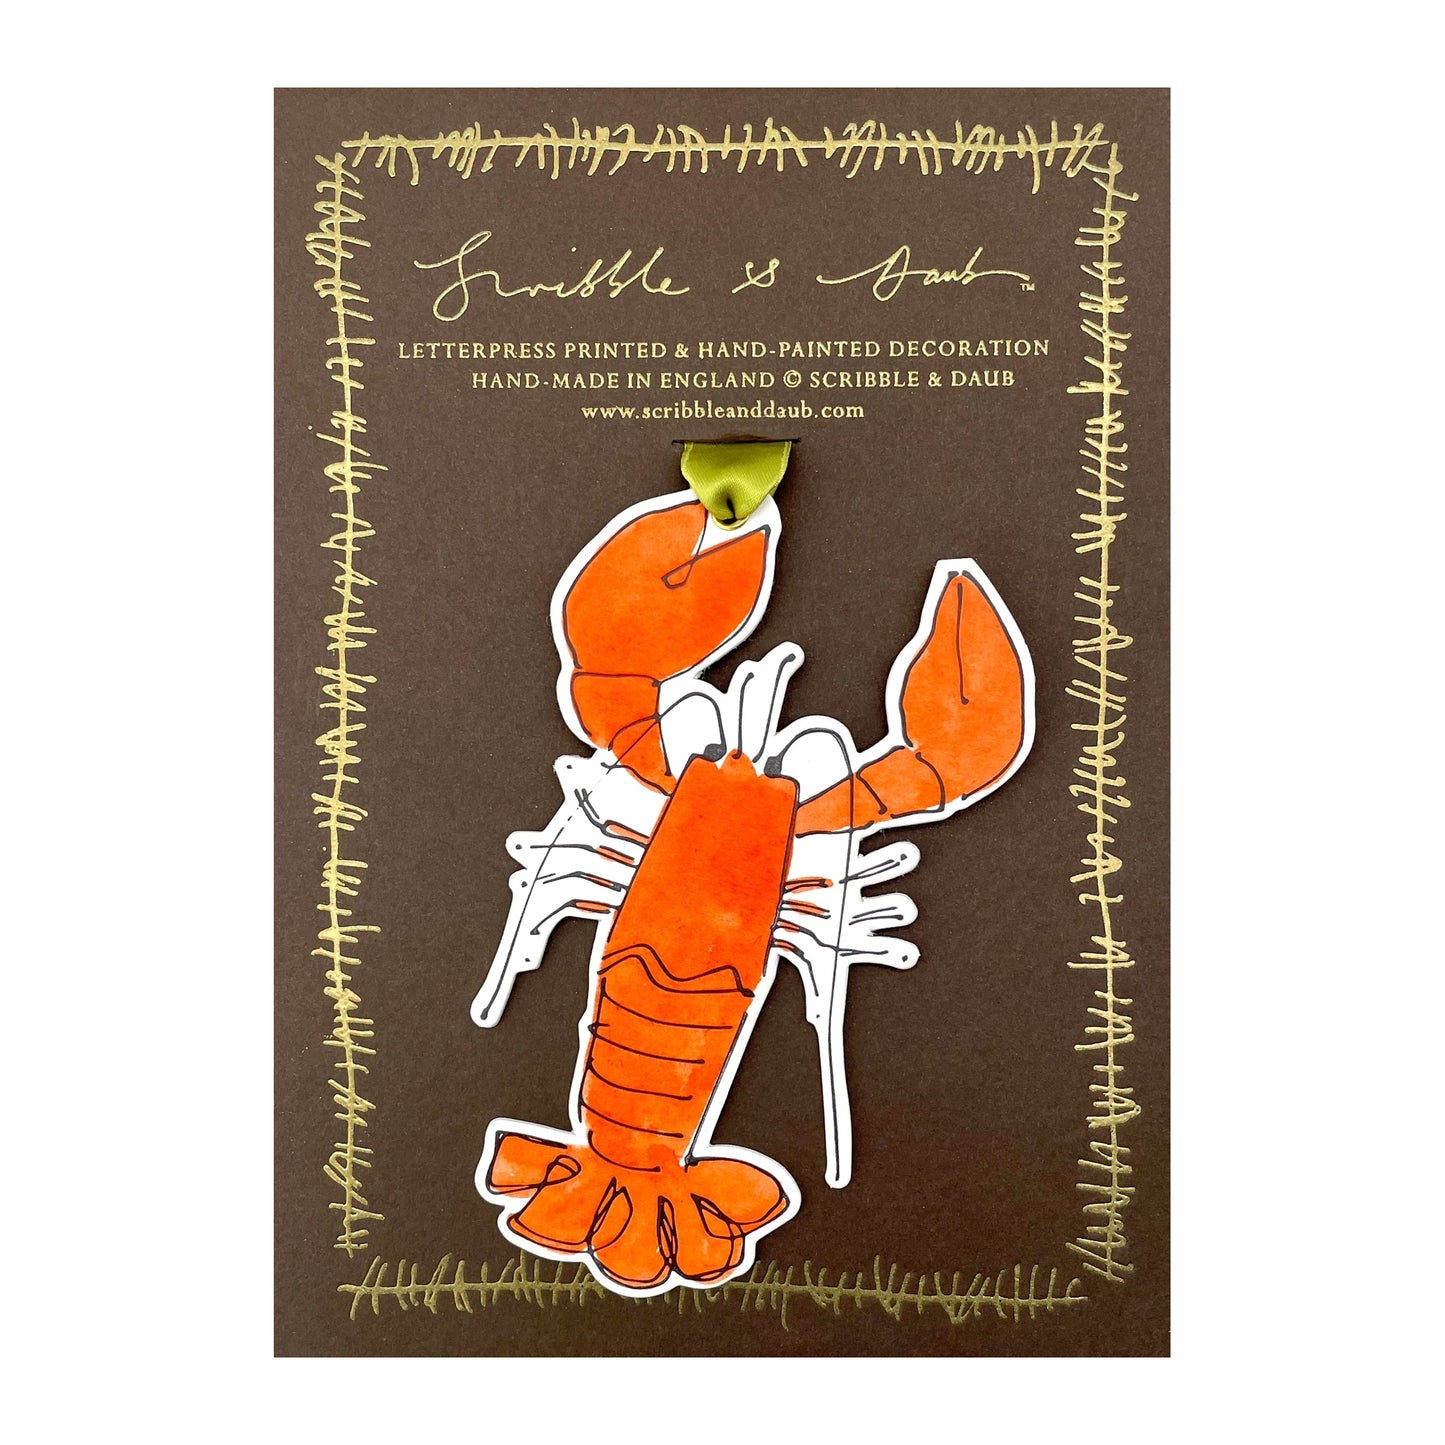 a lobster shaped hanging ornament made of thick 1050gsm off-white card, letterpress printed in black and then hand painted in orange ink. It has a chartreuse green satin ribbon to hang the ornament with. By Scribble & Daub. Pictured on a gold-foiled brown board.